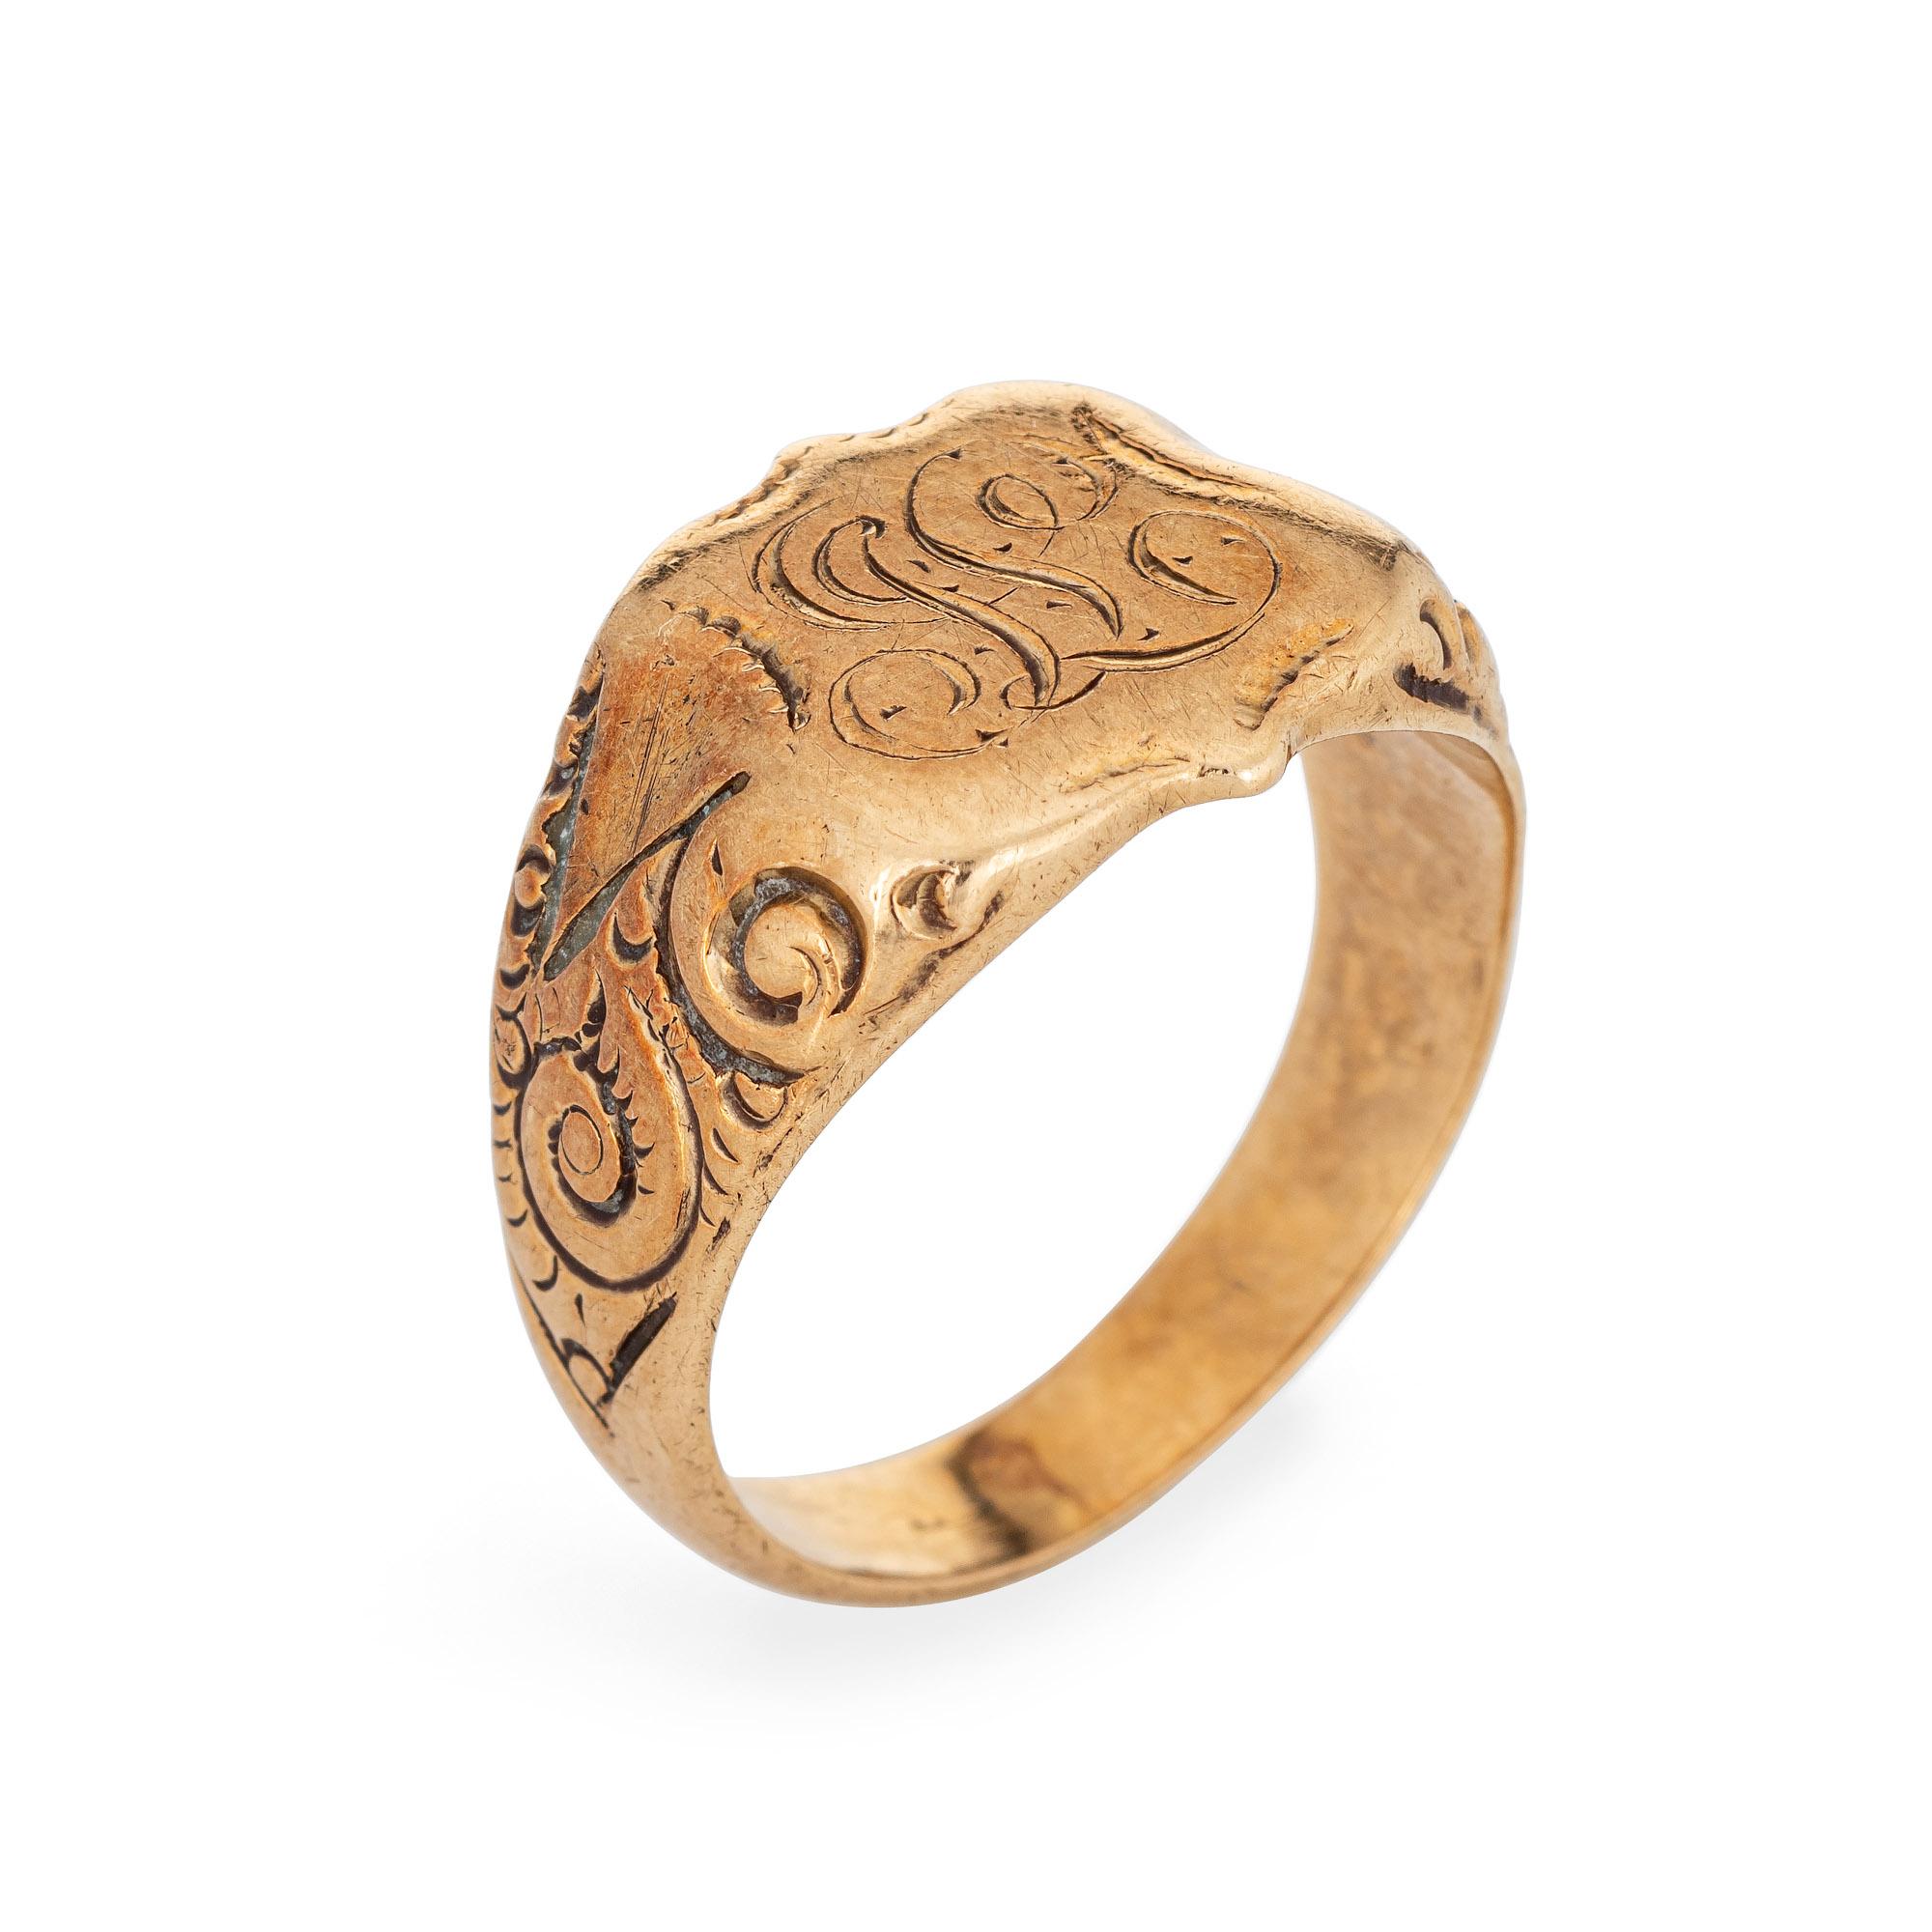 Lovely antique Victorian shield signet ring (circa 1880s to 1900s), crafted in 14 karat rose gold. 

From what we can decipher, the center shield is engraved with the initials 